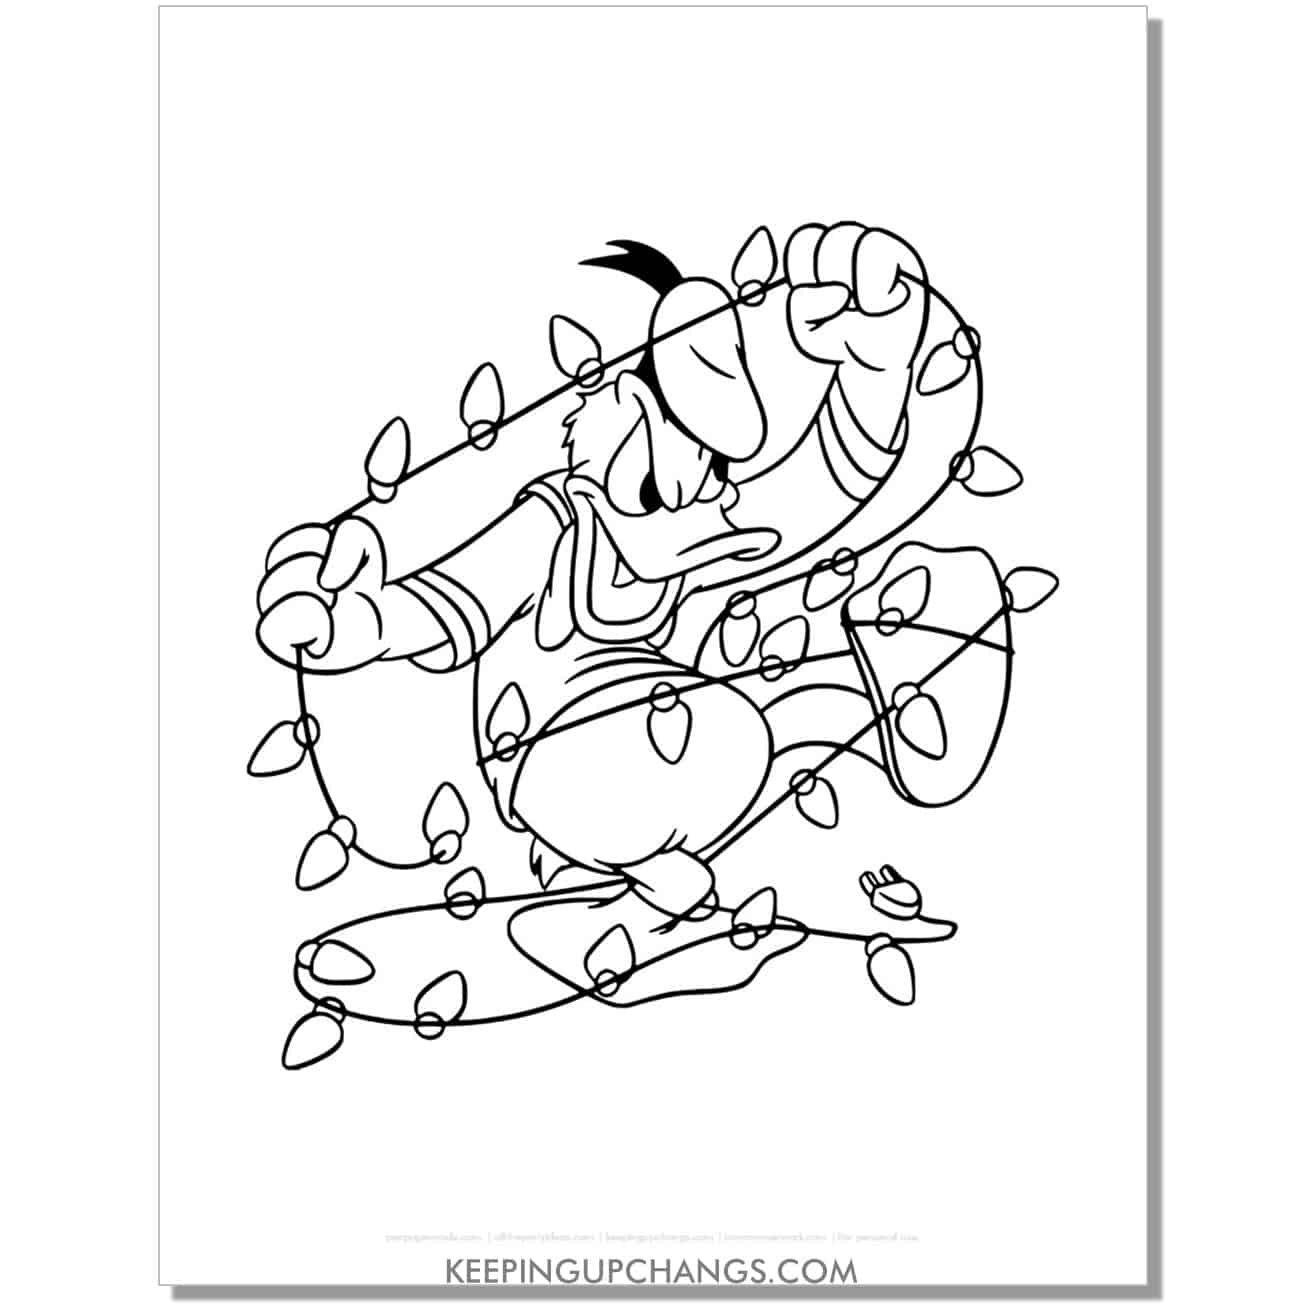 free donald duck tangled in christmas lights coloring page, sheet.